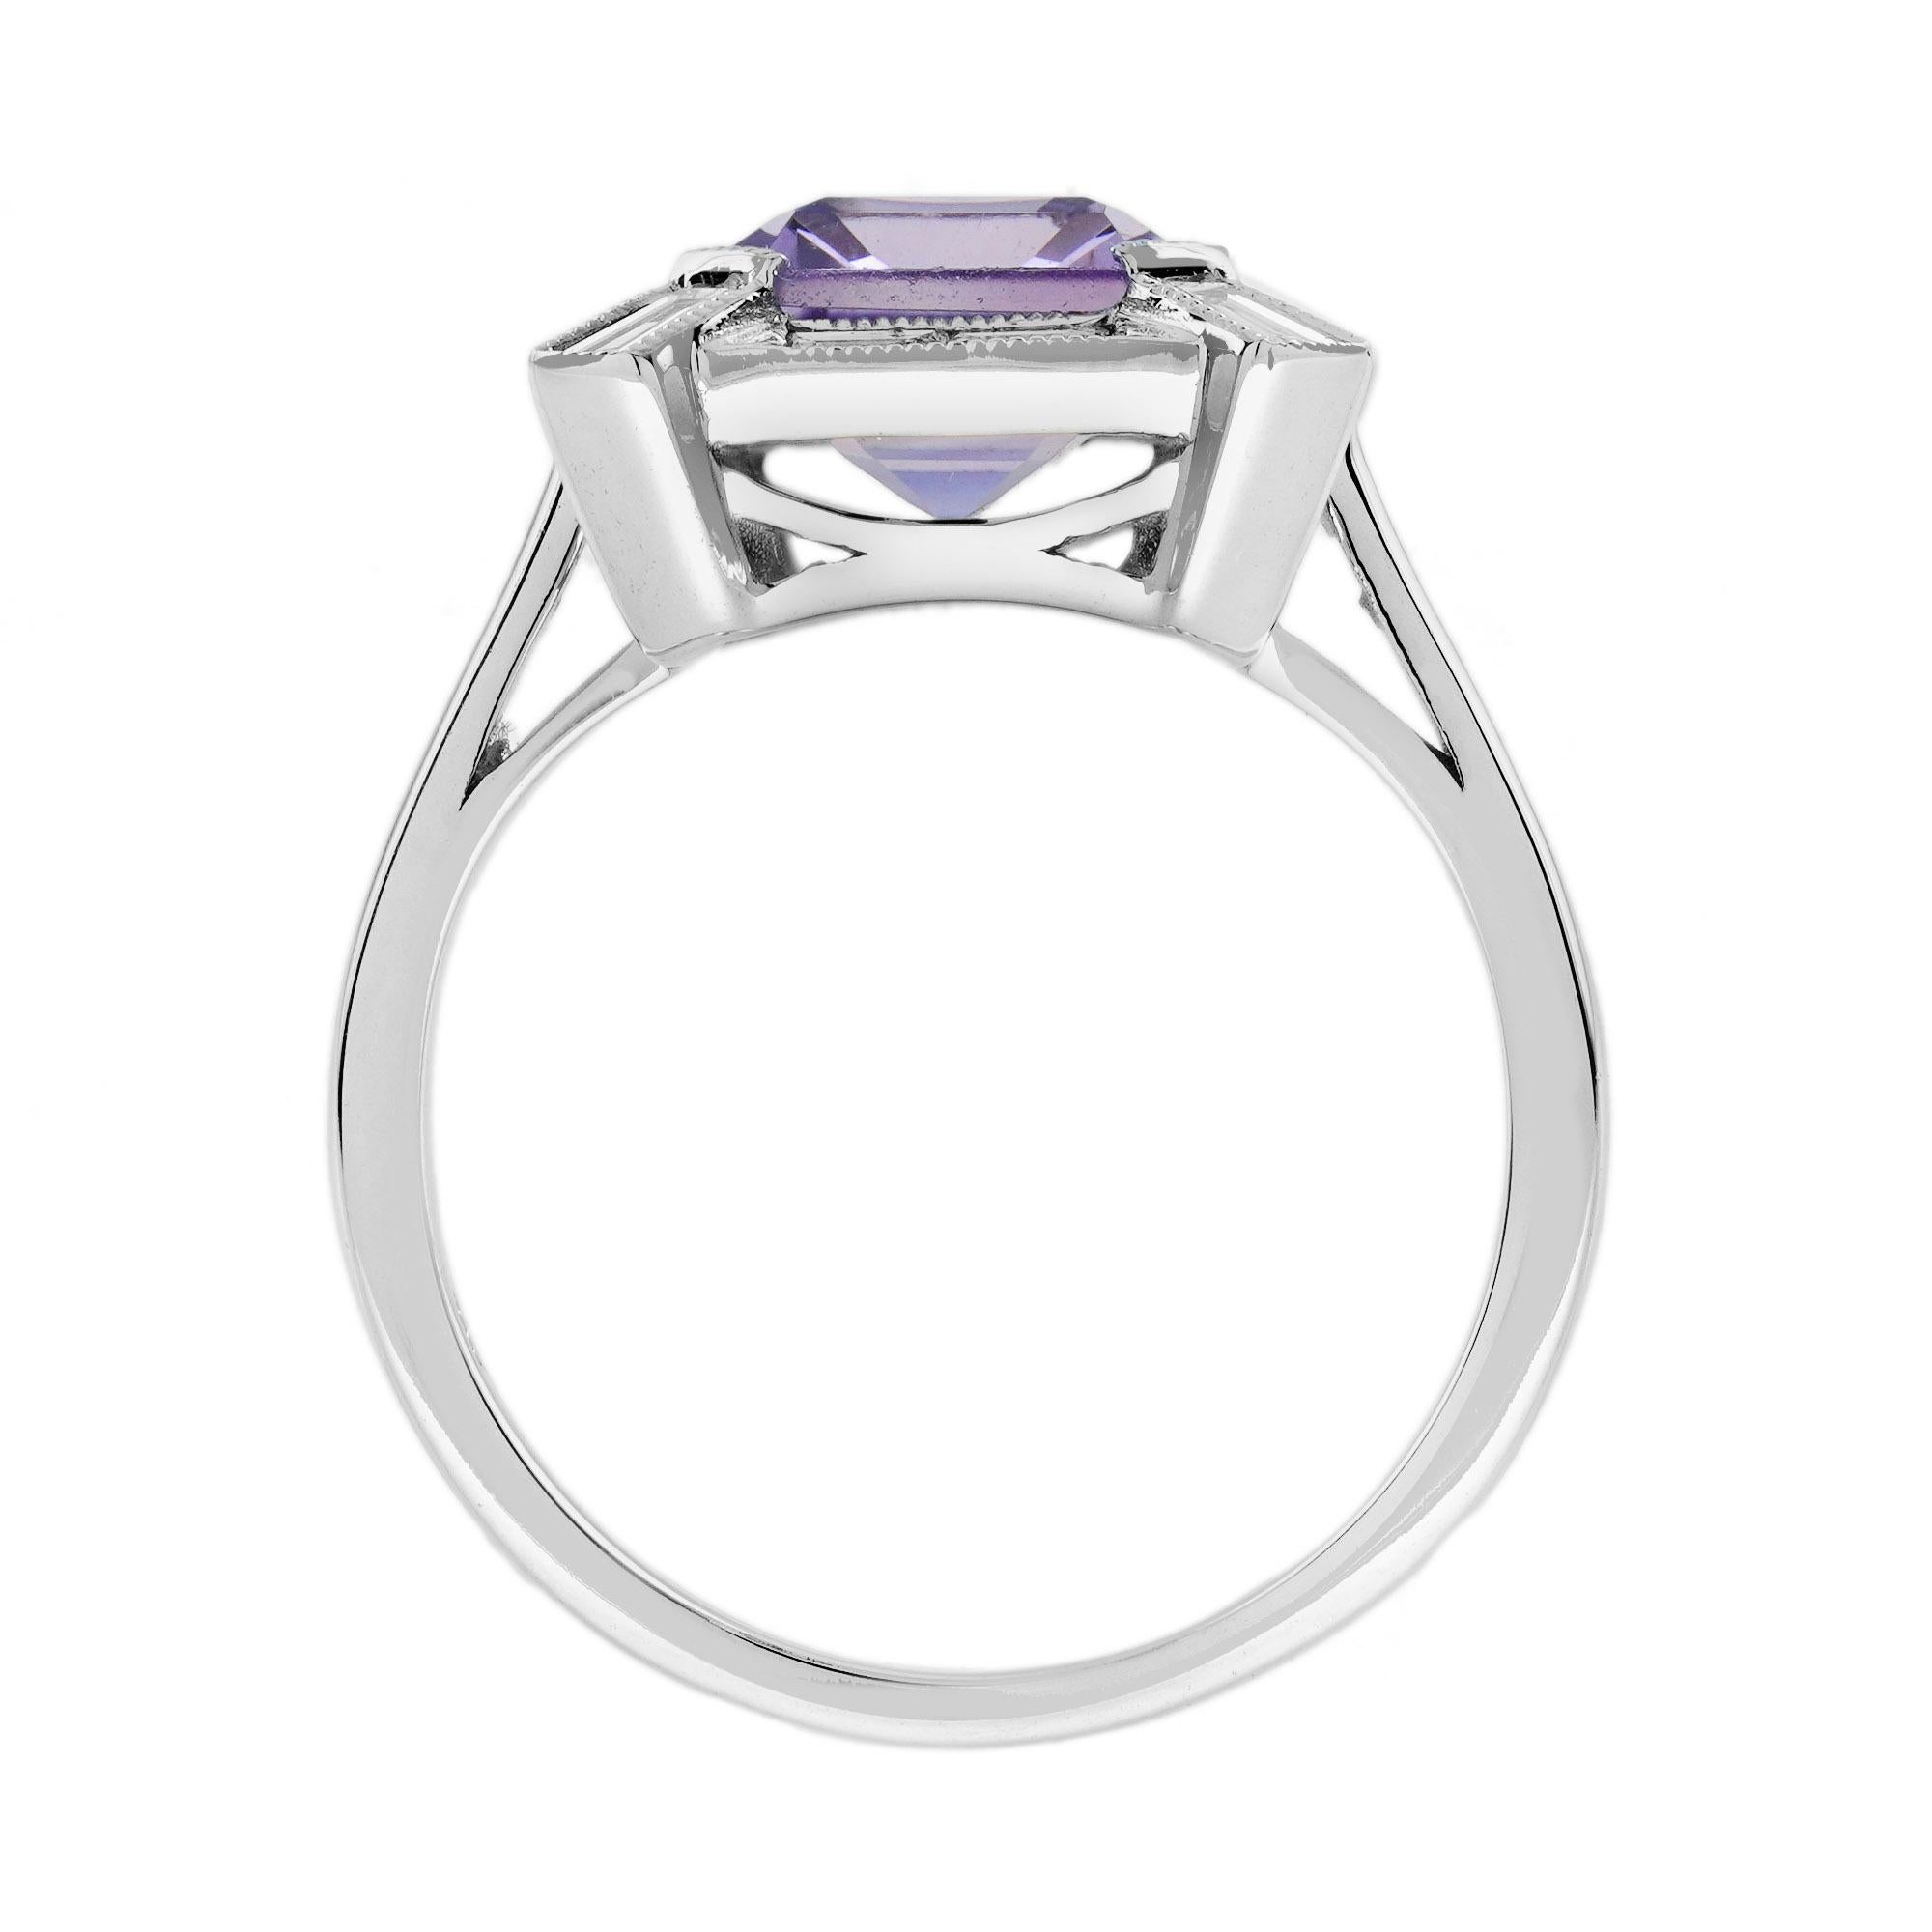 Emerald Cut Pink Amethyst and Diamond Halo Art Deco Style Ring in 14K White Gold For Sale 2